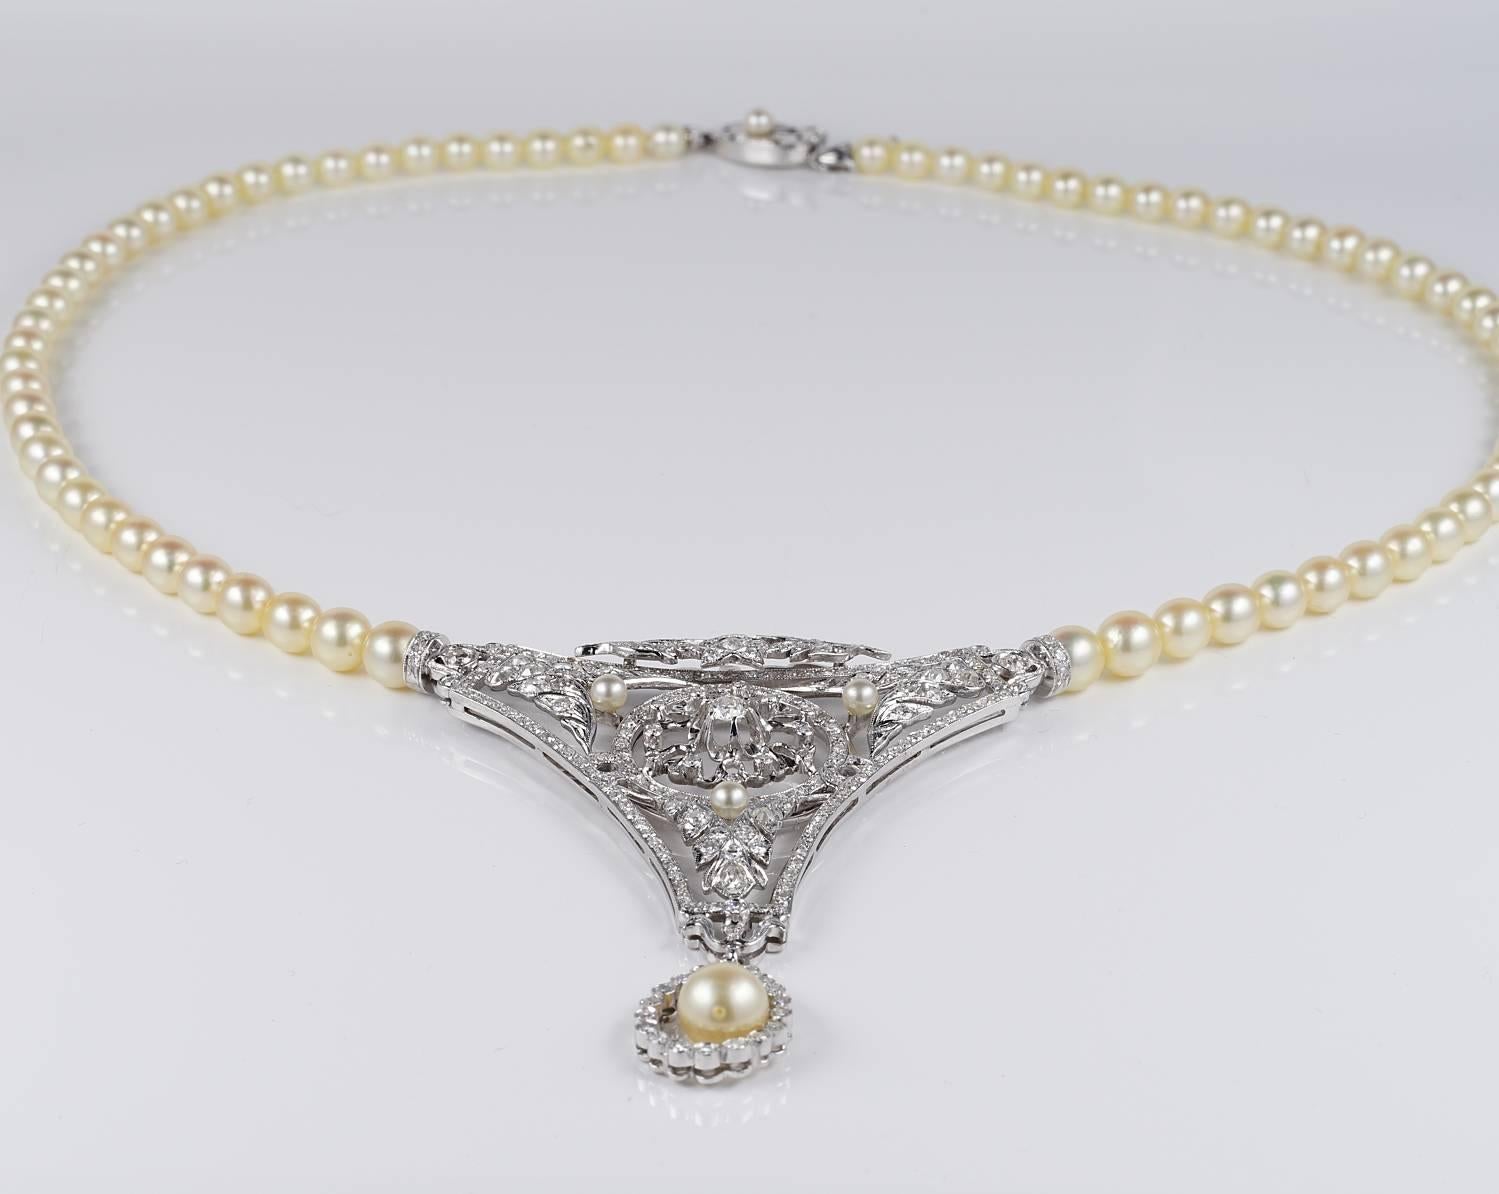 A magnificent rare Example of Cultured Pearl and impressive Diamond centre

Remarkable 18 KT solid gold workmanship which impress for the rich intricate design leaf inspired and naturalistic motifs
even the back side is refined with stunning